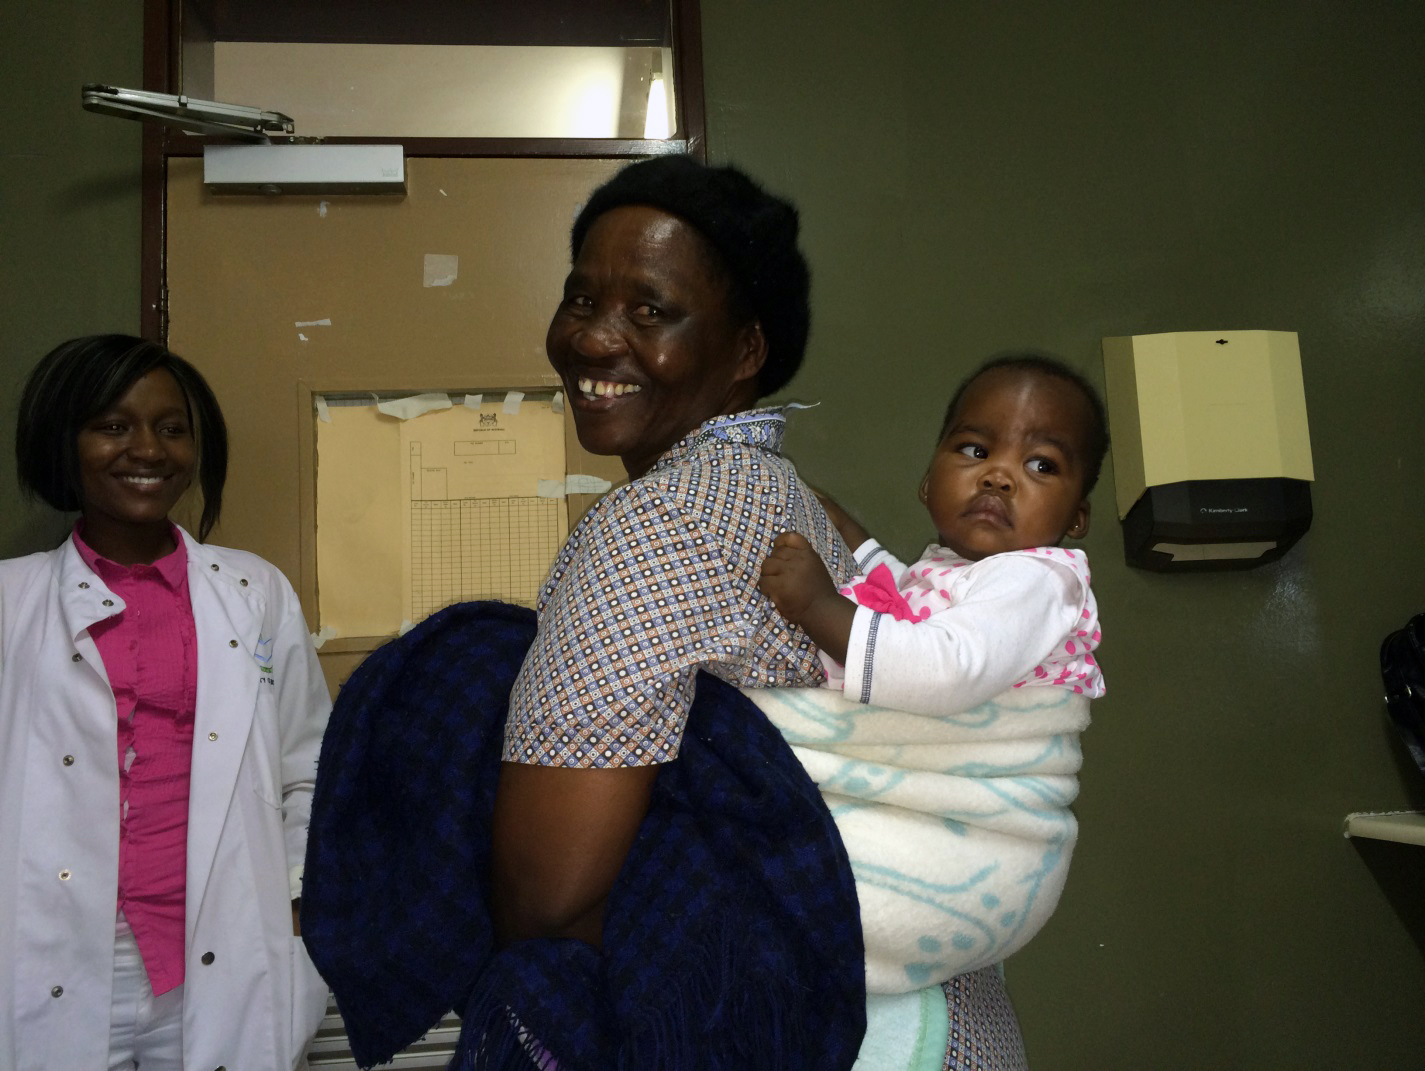 A doctor smiles at a patient carrying a baby in a baby carrier on their back.